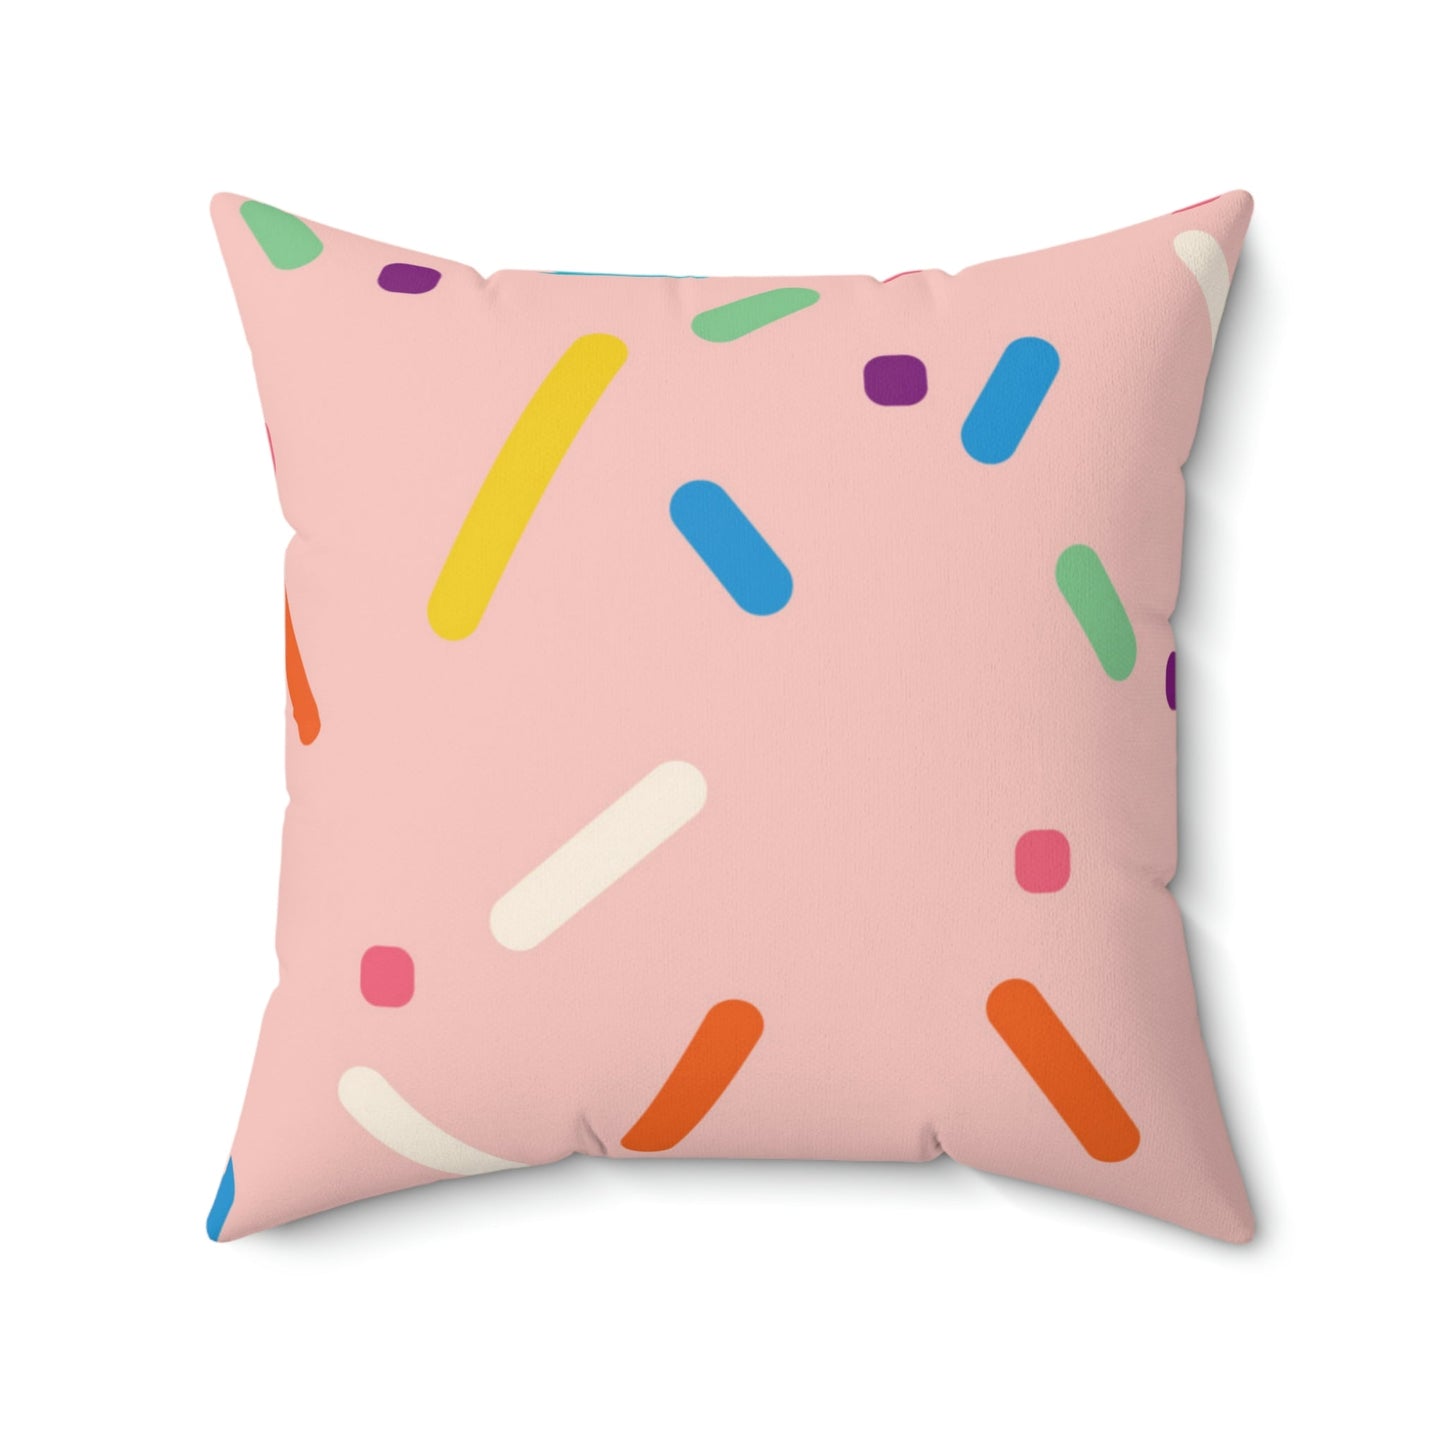 Strawberry Birthday Cake Square Pillow Home Decor Pink Sweetheart